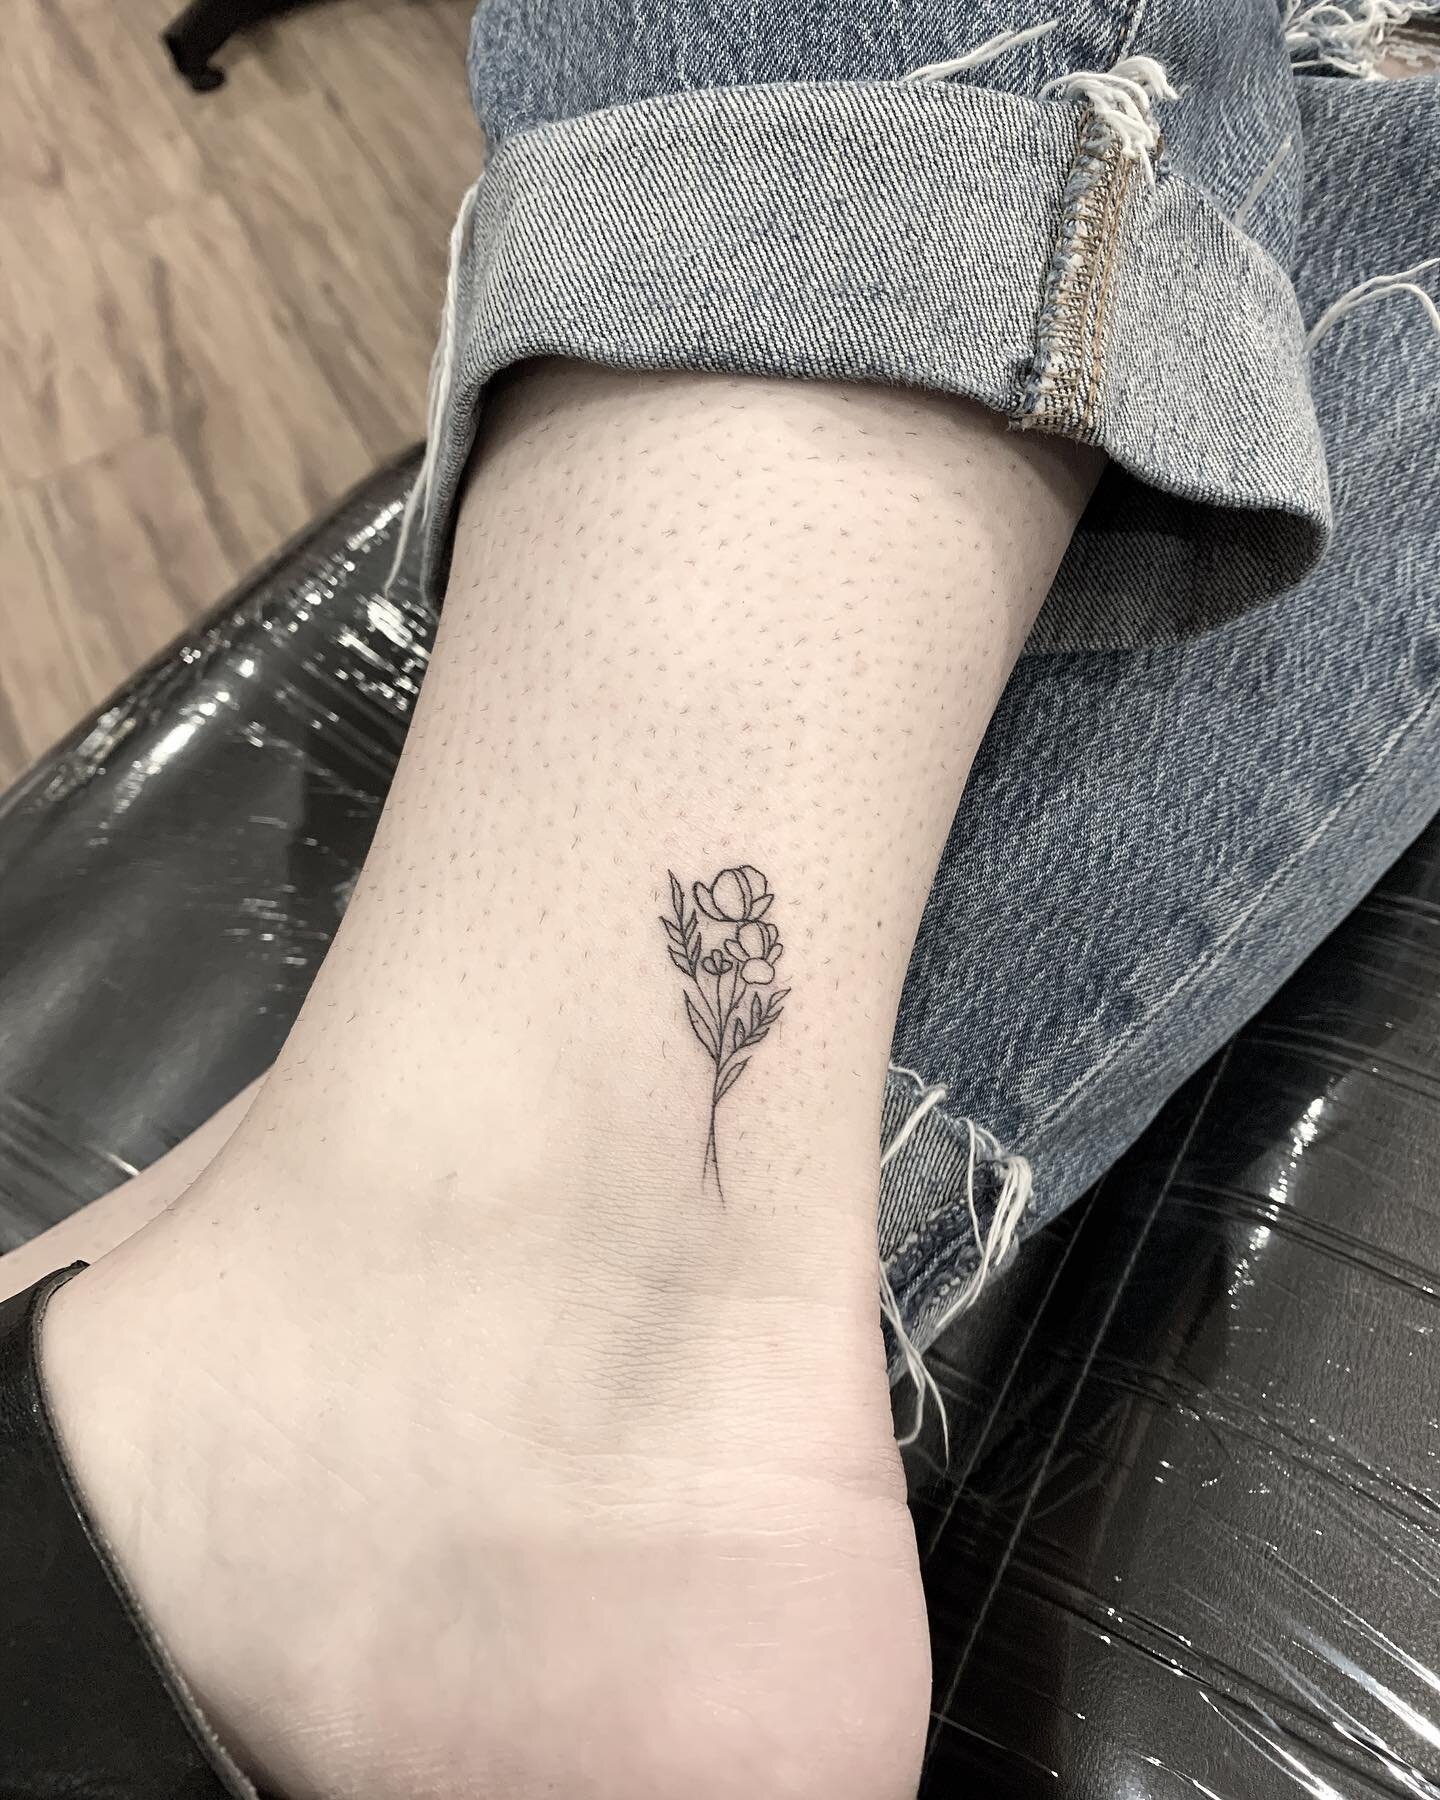 &bull; Thanks for following my work 💫
&bull; @hermosaink / @hermosainkcollective ✨
&bull; Delicate Tattoos 🌻🌷
&bull; Booking / Appointment DM 📬
&bull; Hermosa Beach, Los Angeles 🌴🇺🇸🇧🇷
_______________________________________________________
#